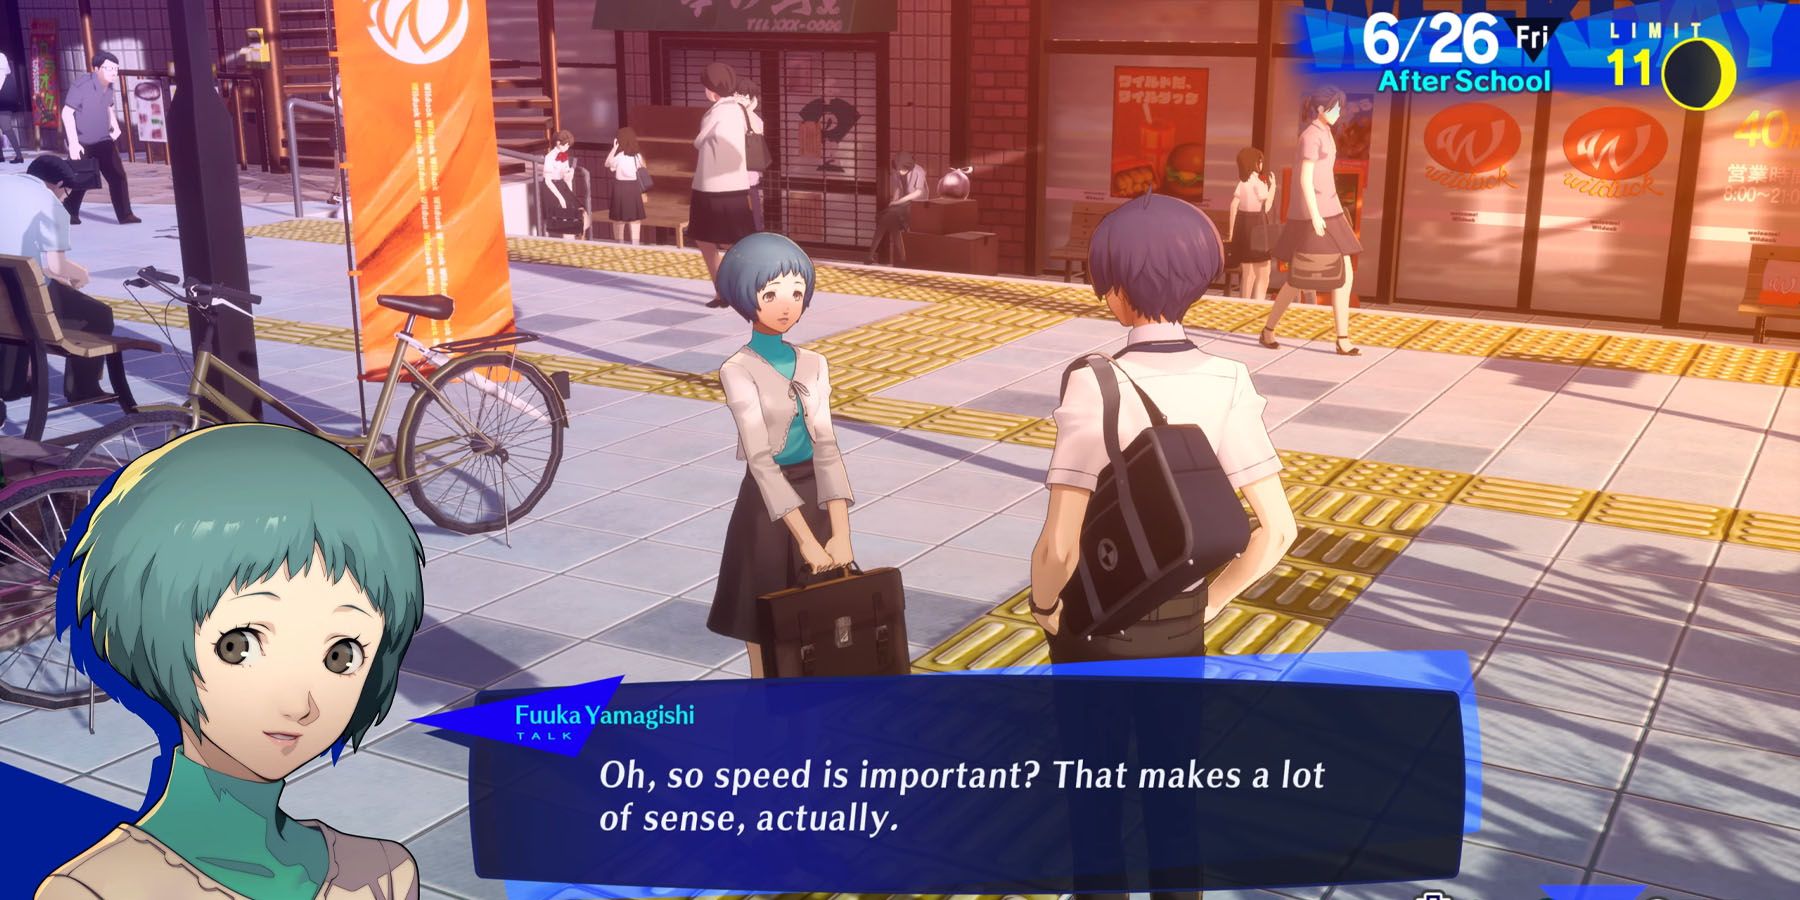 Persona 3 Reload gets new trailer, showing gameplay and character details